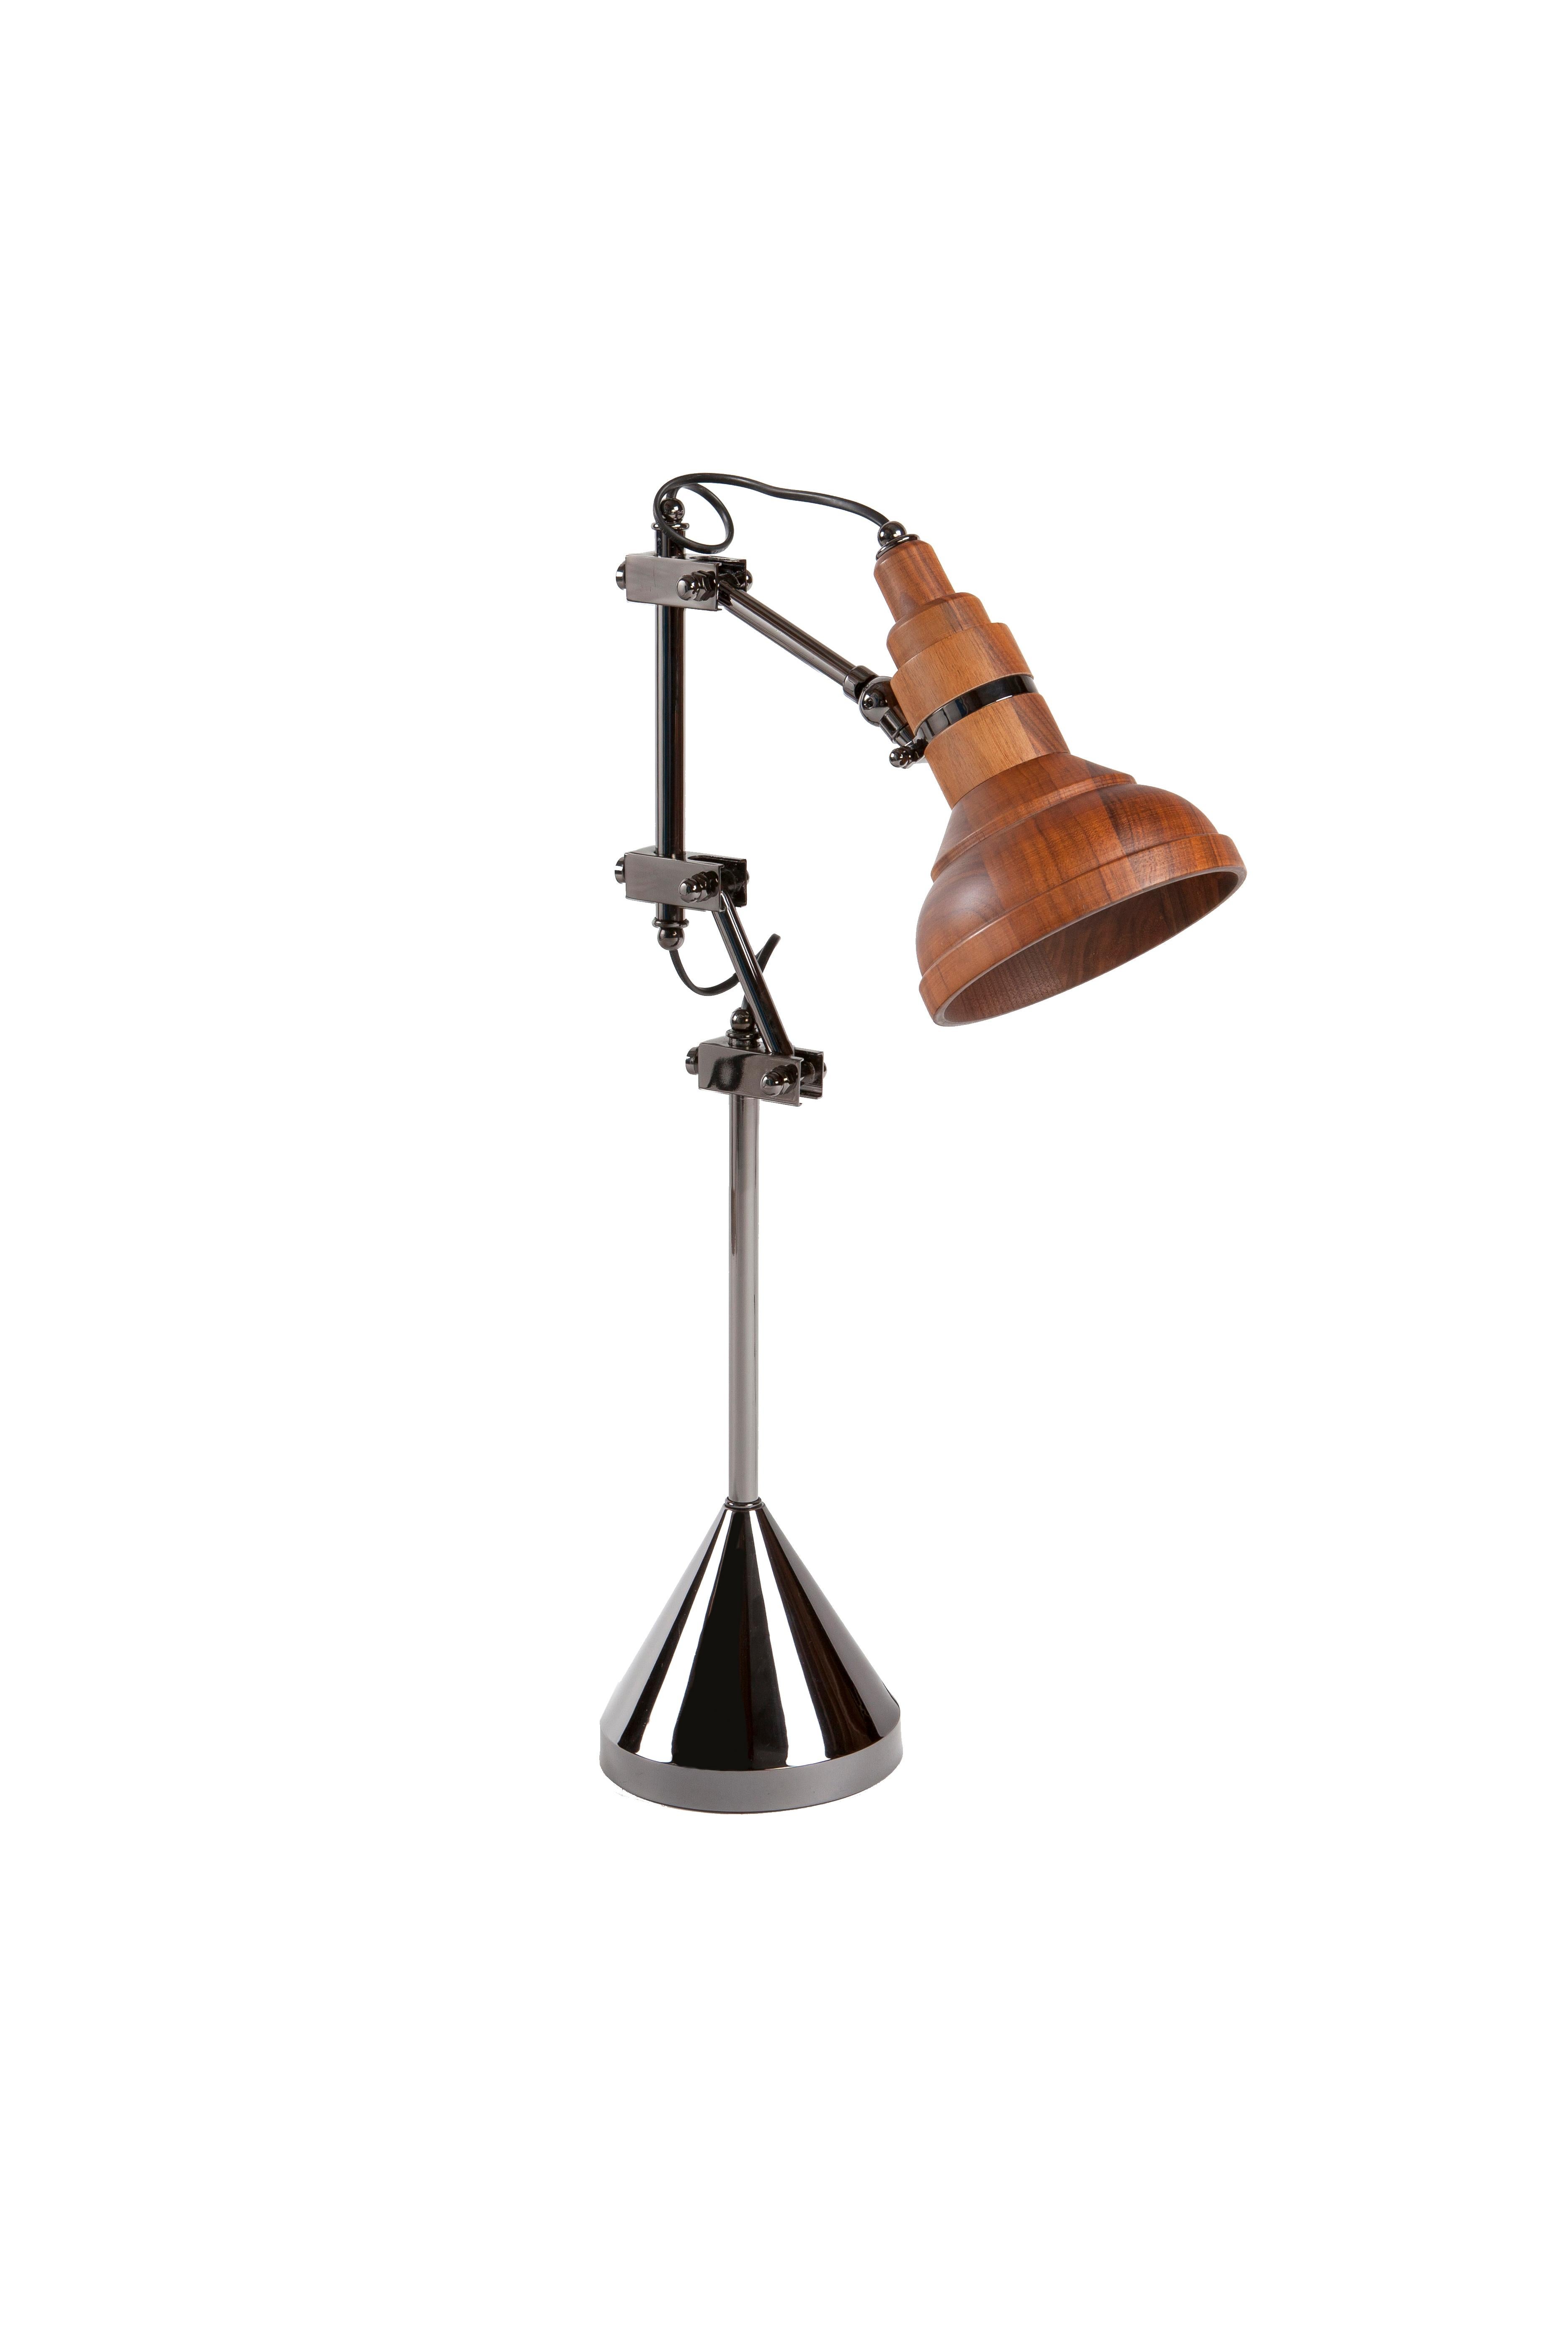 lighting by Kontra.
Wooden headed metal table lamp provides illumination with a Mid-Century Modern feeling to it.
Wood desk lamp, study light 70's style.